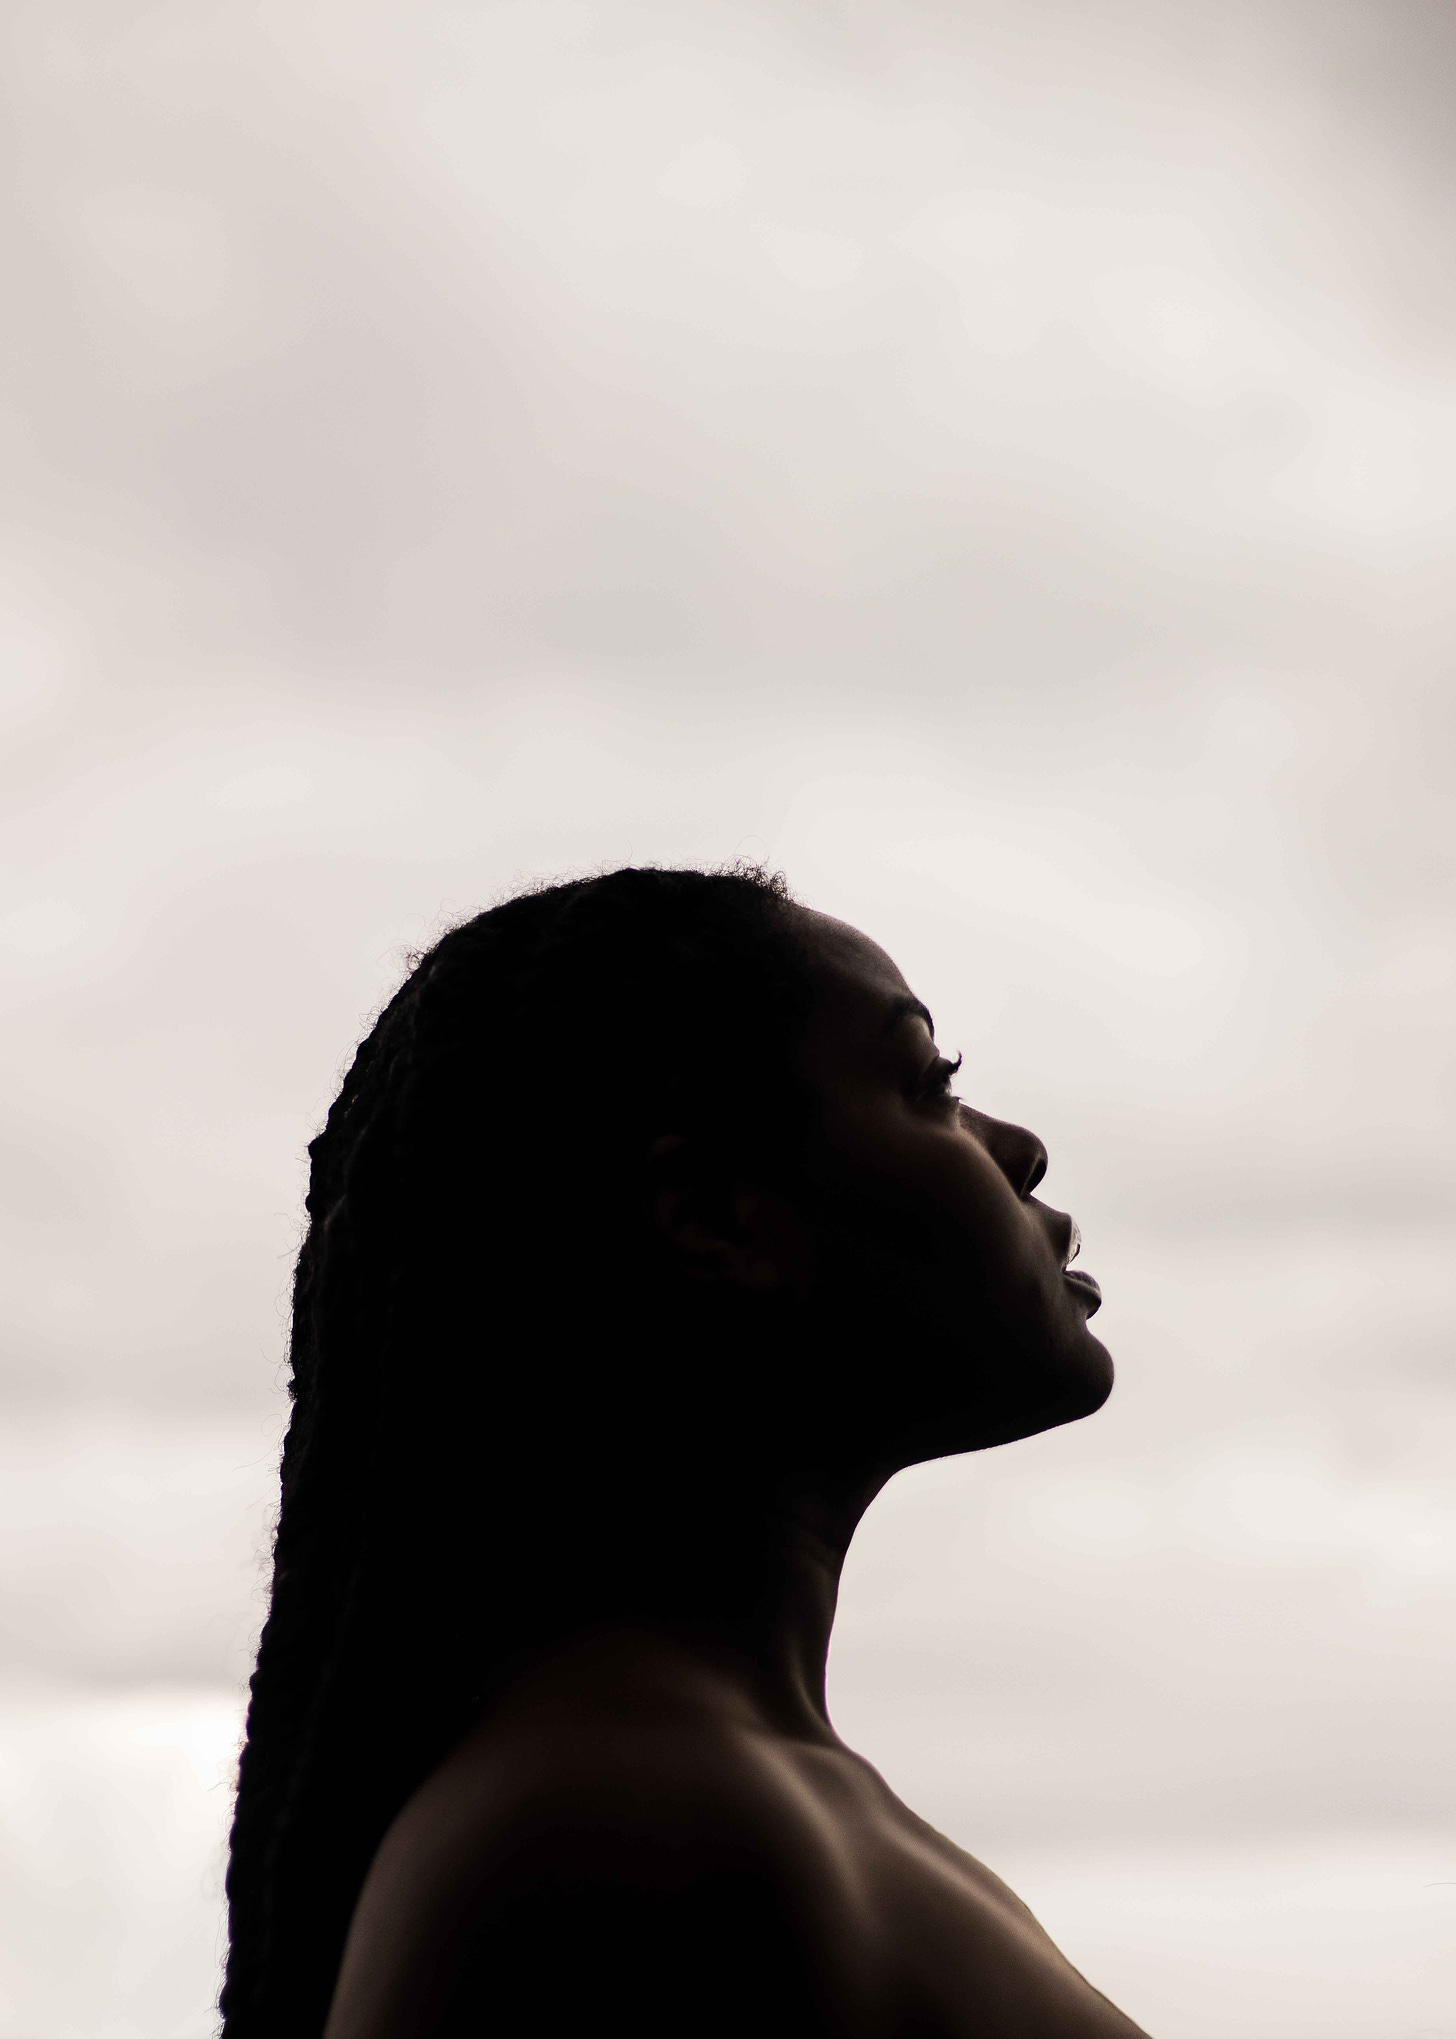 Sepia photo of the profile of a Black woman looking toward the sky